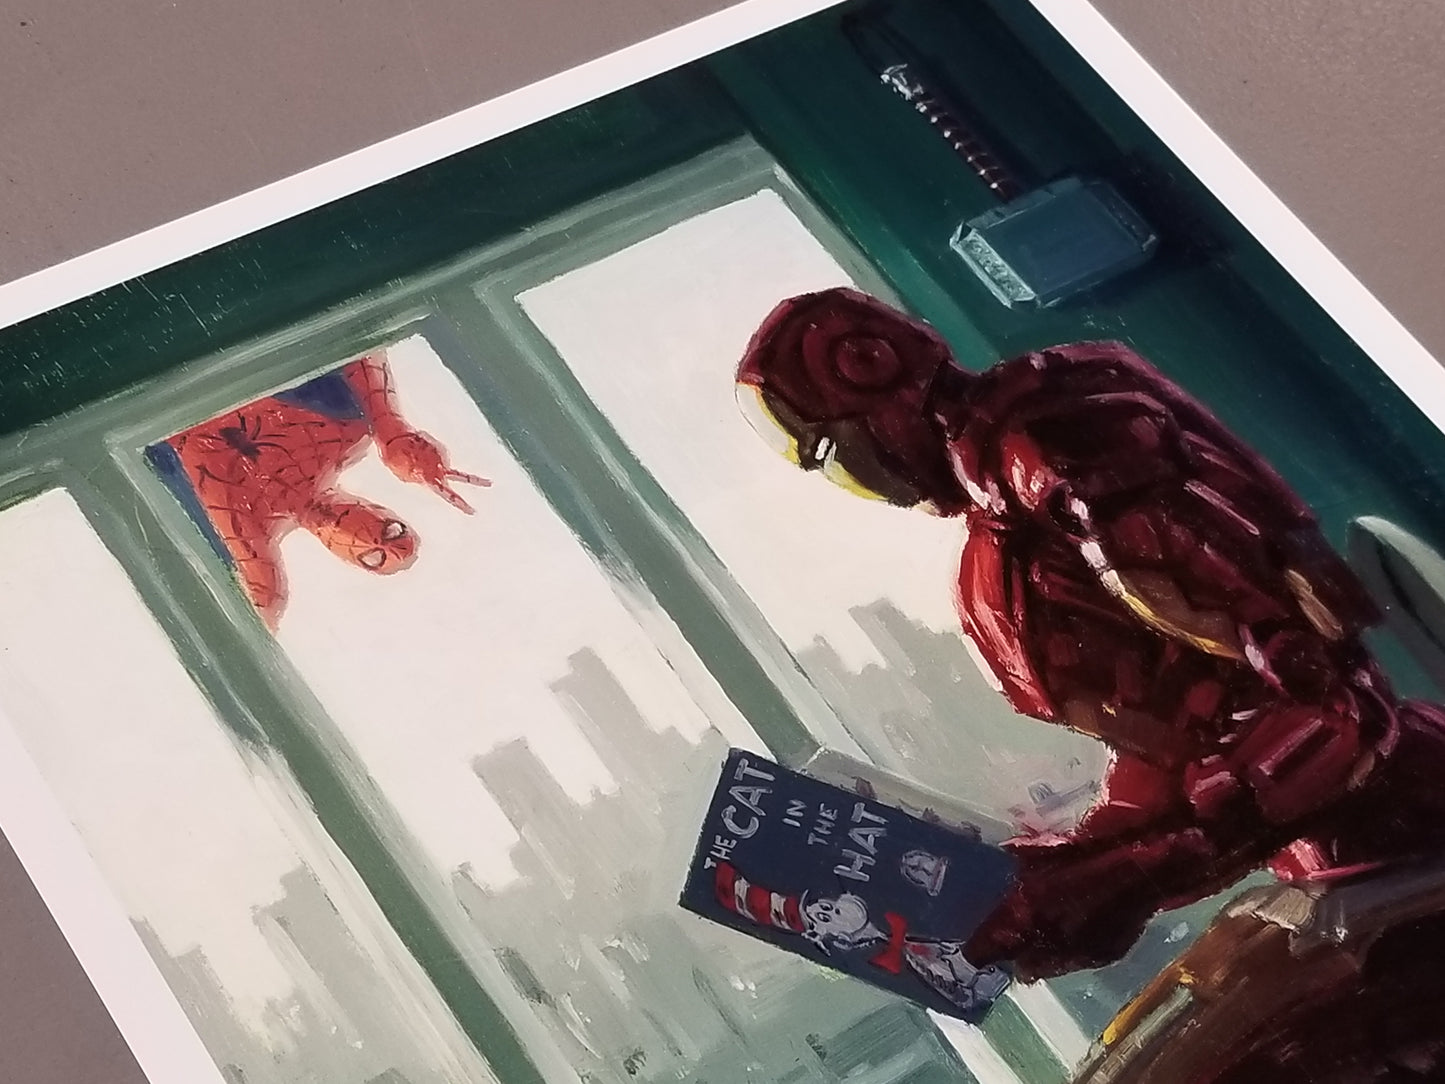 "I need it." - Tony Stark  Iron Man Marvel Parody Art Print by Bucket Art.  Cool Things: ﻿Thor's Hammer hanging on wall, Spider-Man photo bombing, Iron Man is reading "Cat in the Hat."  ﻿Did You Know? ﻿Tom Holland signed the Original & owns a canvas.   Print Size: 16" x 12" on Premium Archival Paper